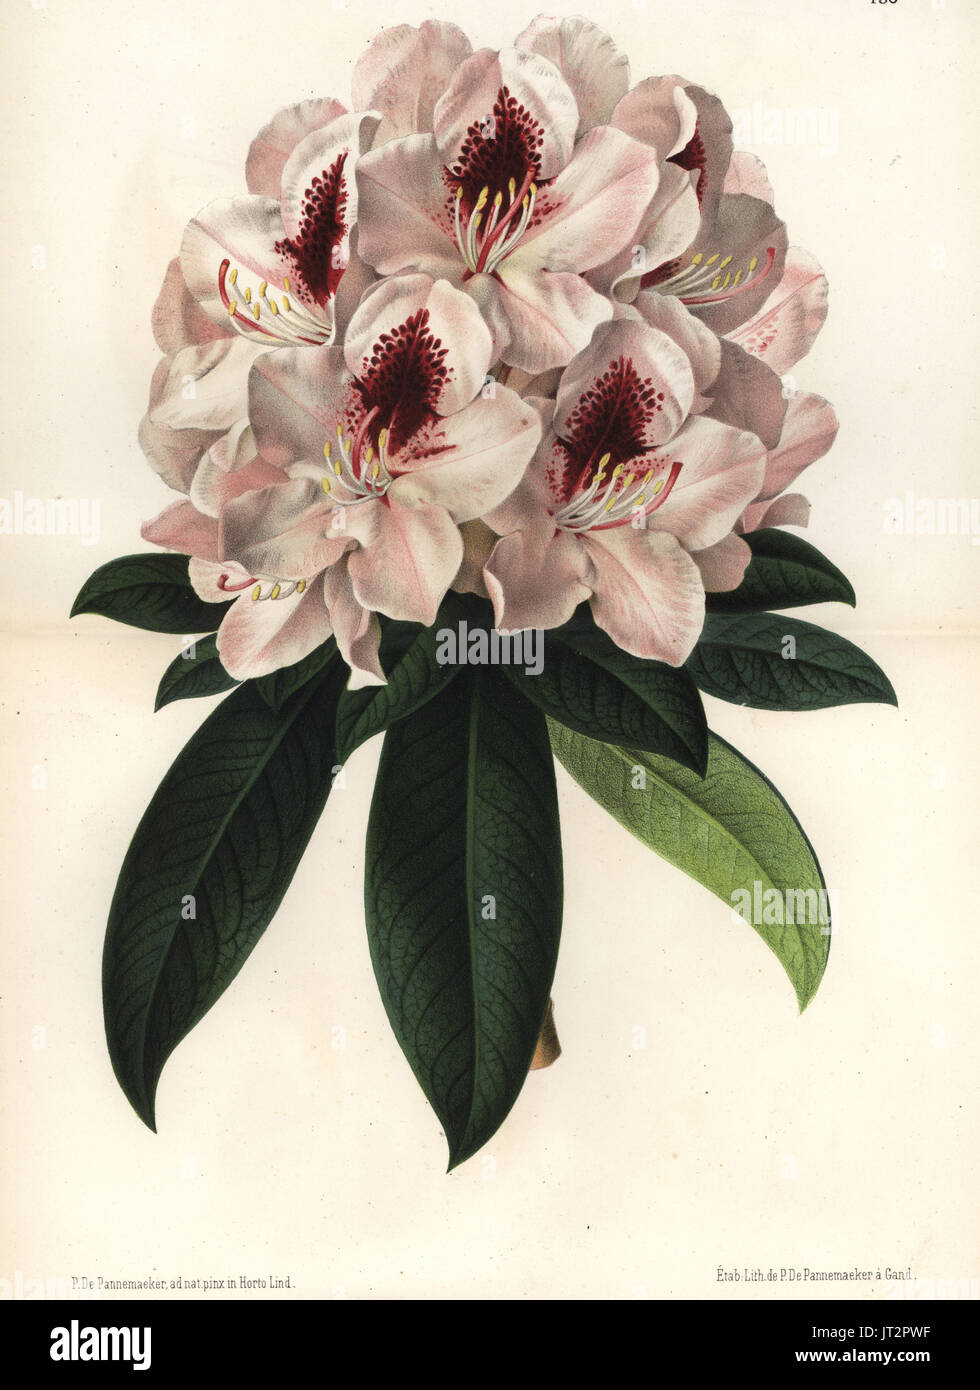 Rhododendron hybridum, Madame Linden (Rhododendrum Madame Linden). Drawn and chromolithographed by P. de Pannemaeker from Jean Linden's l'Illustration Horticole, Brussels, 1873. Stock Photo